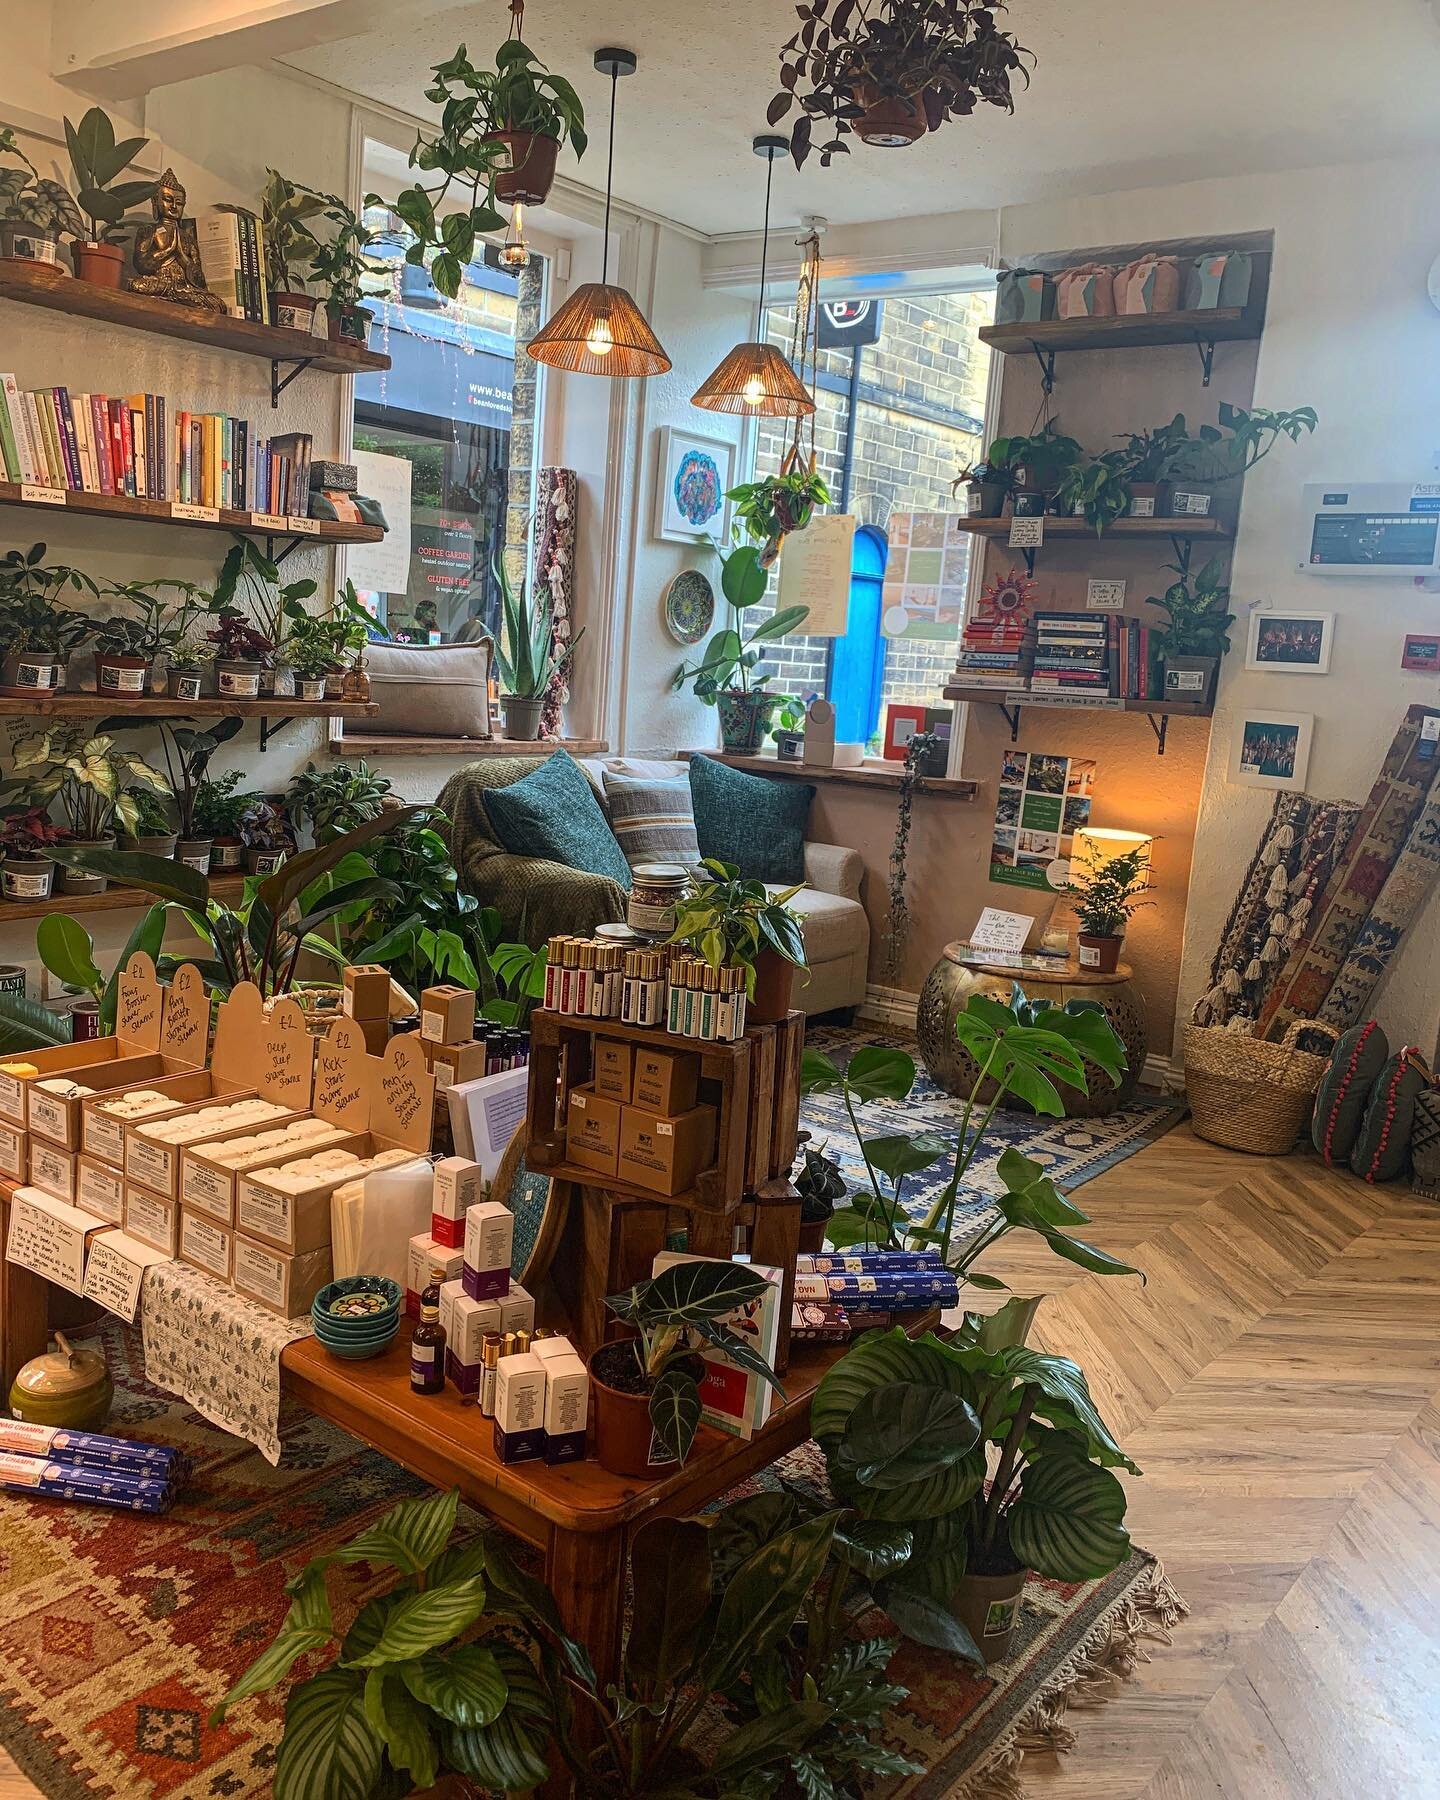 🛎 WE ARE OPEN (ding ding ding!) 🛎

@rootsoftolos_  Holistic Wellbeing Shop open today 11-3 (possibly later if someone comes in with reaaaaaally good chat ;&mdash;))

Come on down! We have&hellip;

&bull; Aromatherapy products inc. pure essential oi